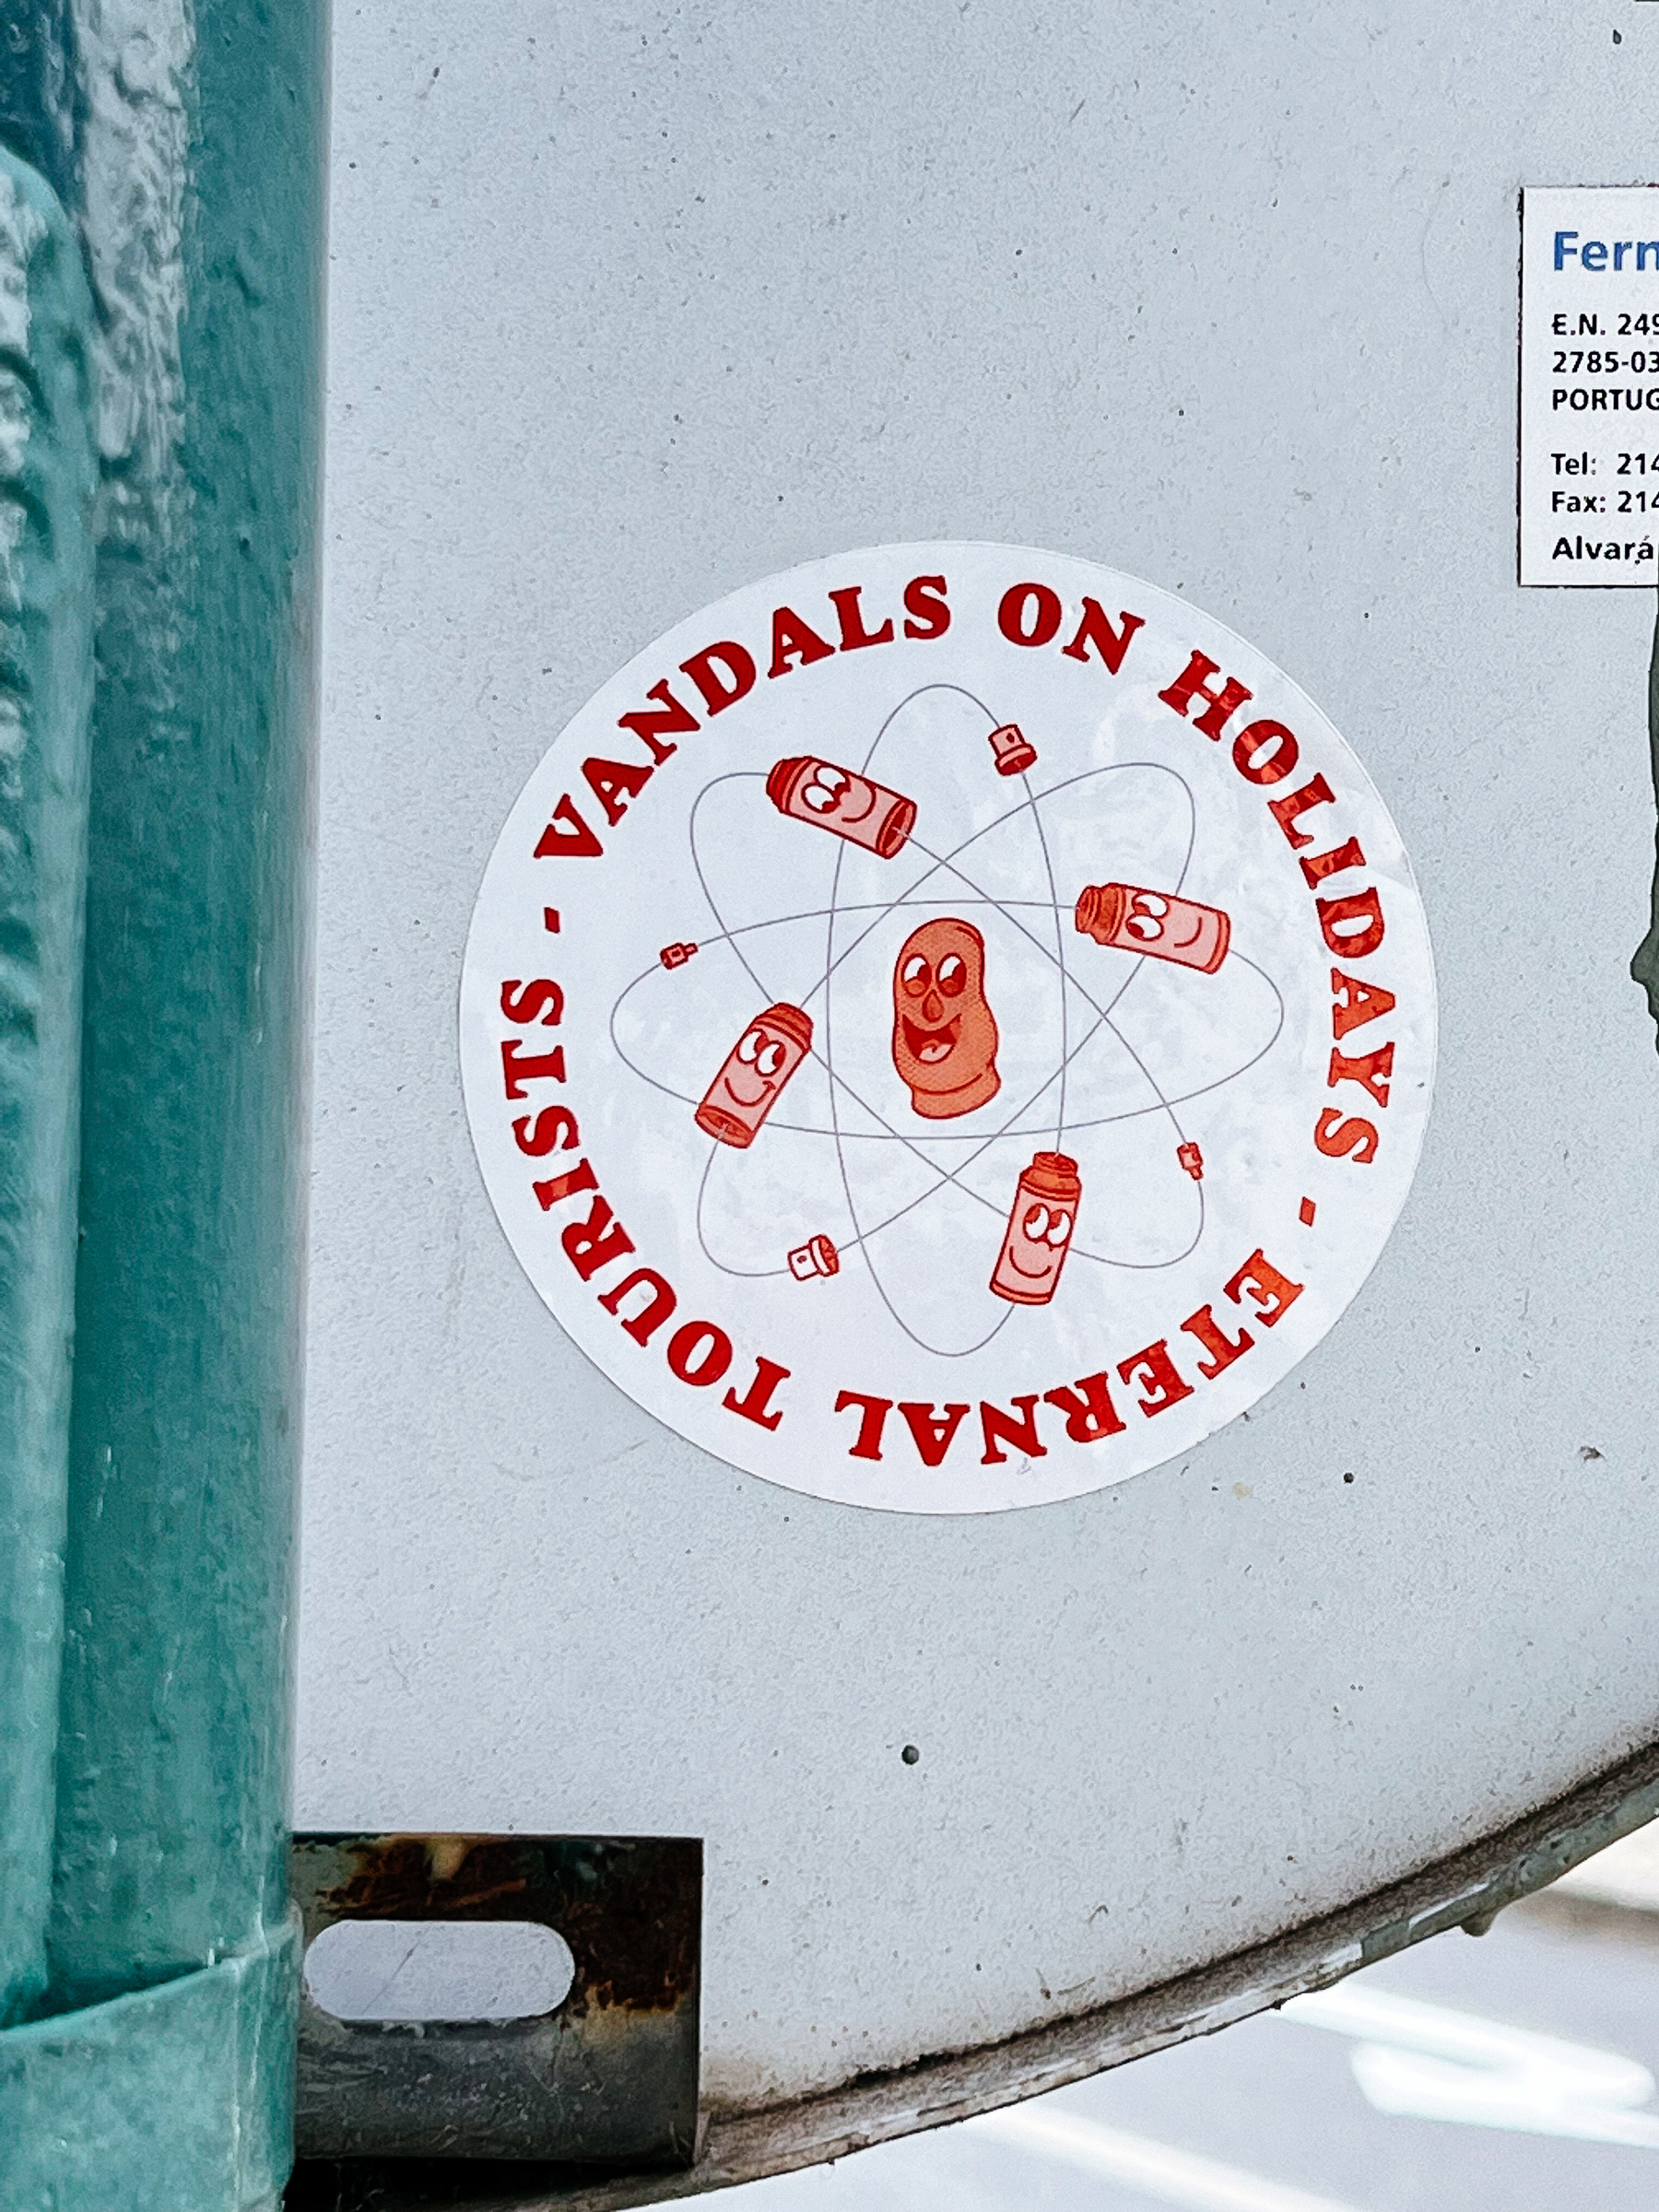 “Vandals on holidays - eternal tourists”, written around an image that looks like an atom, but with spray paint cans. 